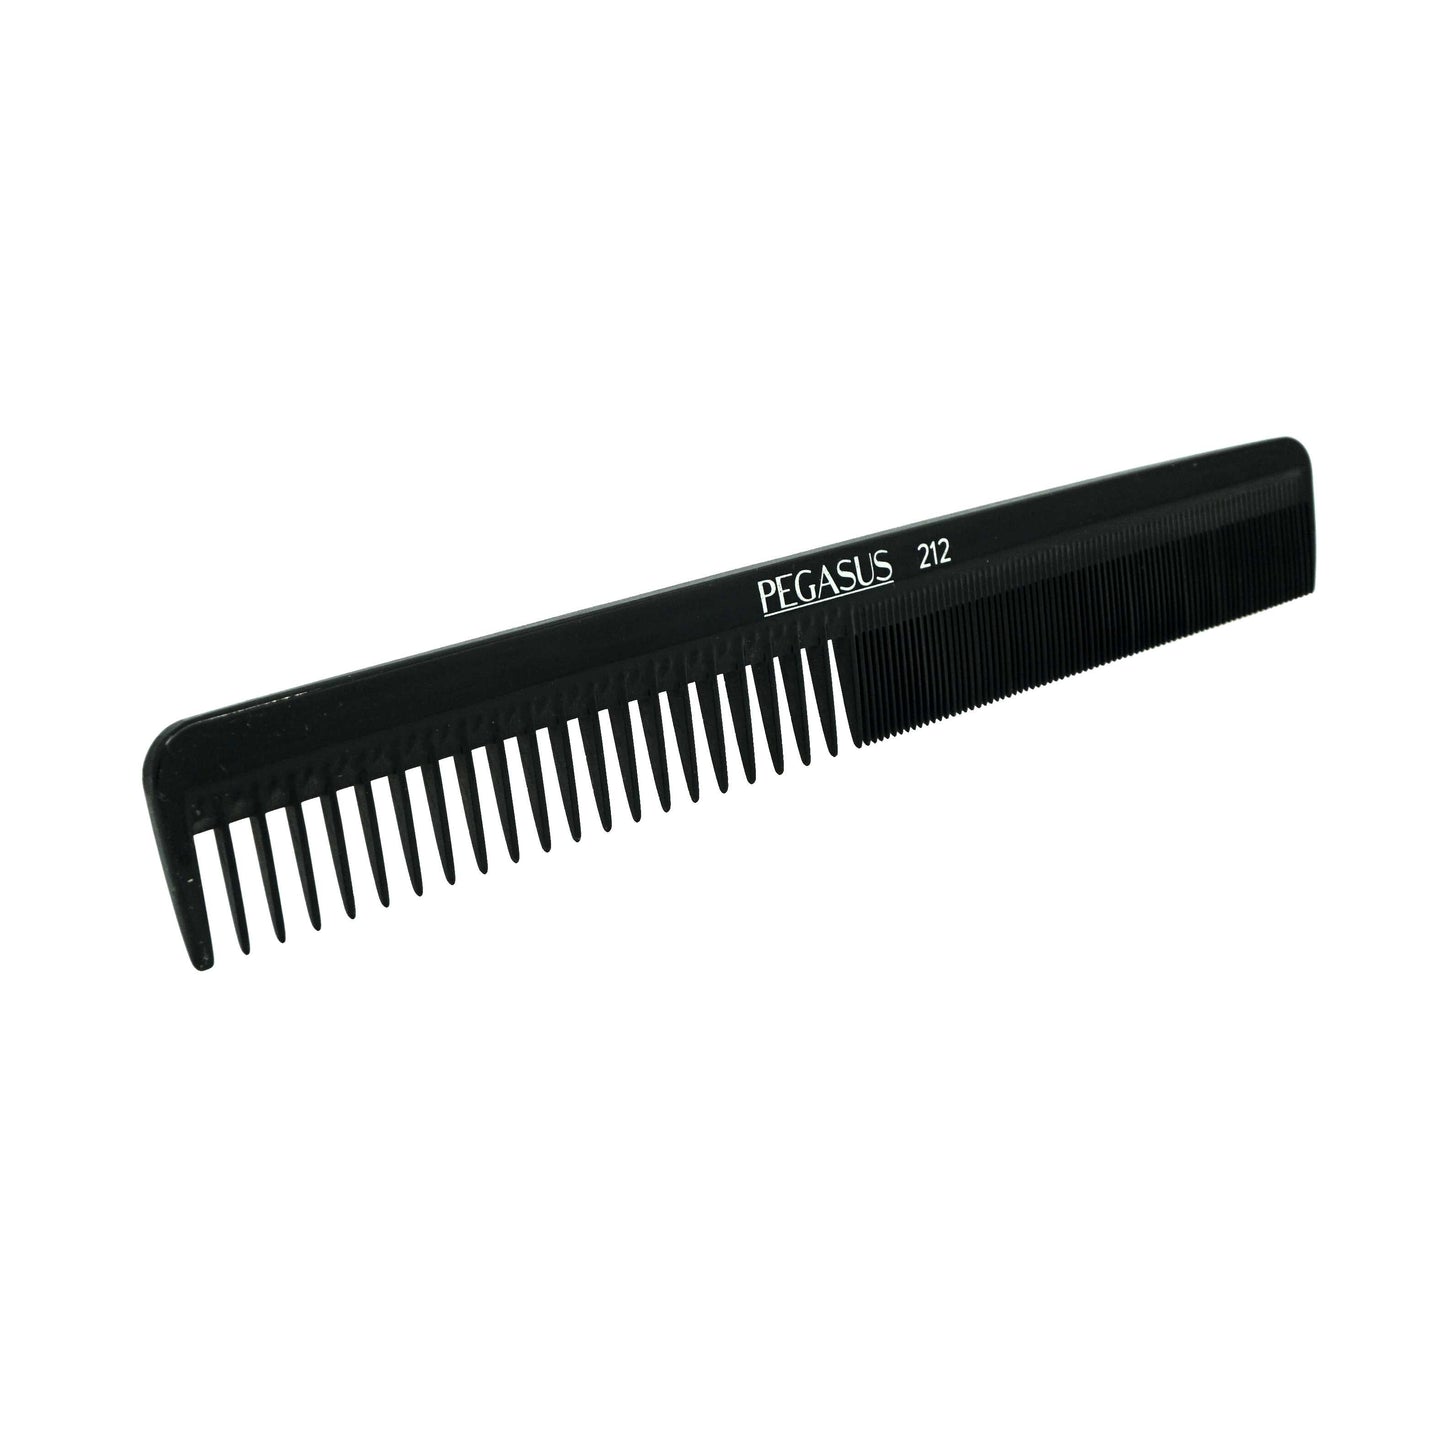 Pegasus 212, 8.25in Hard Rubber Styling Comb with Extra Course and Fine Teeth, Smooth Edges, Anti Static, Heat and Chemically Resistant, Wet Hair, Everyday Grooming Comb | Peines de goma dura - Black